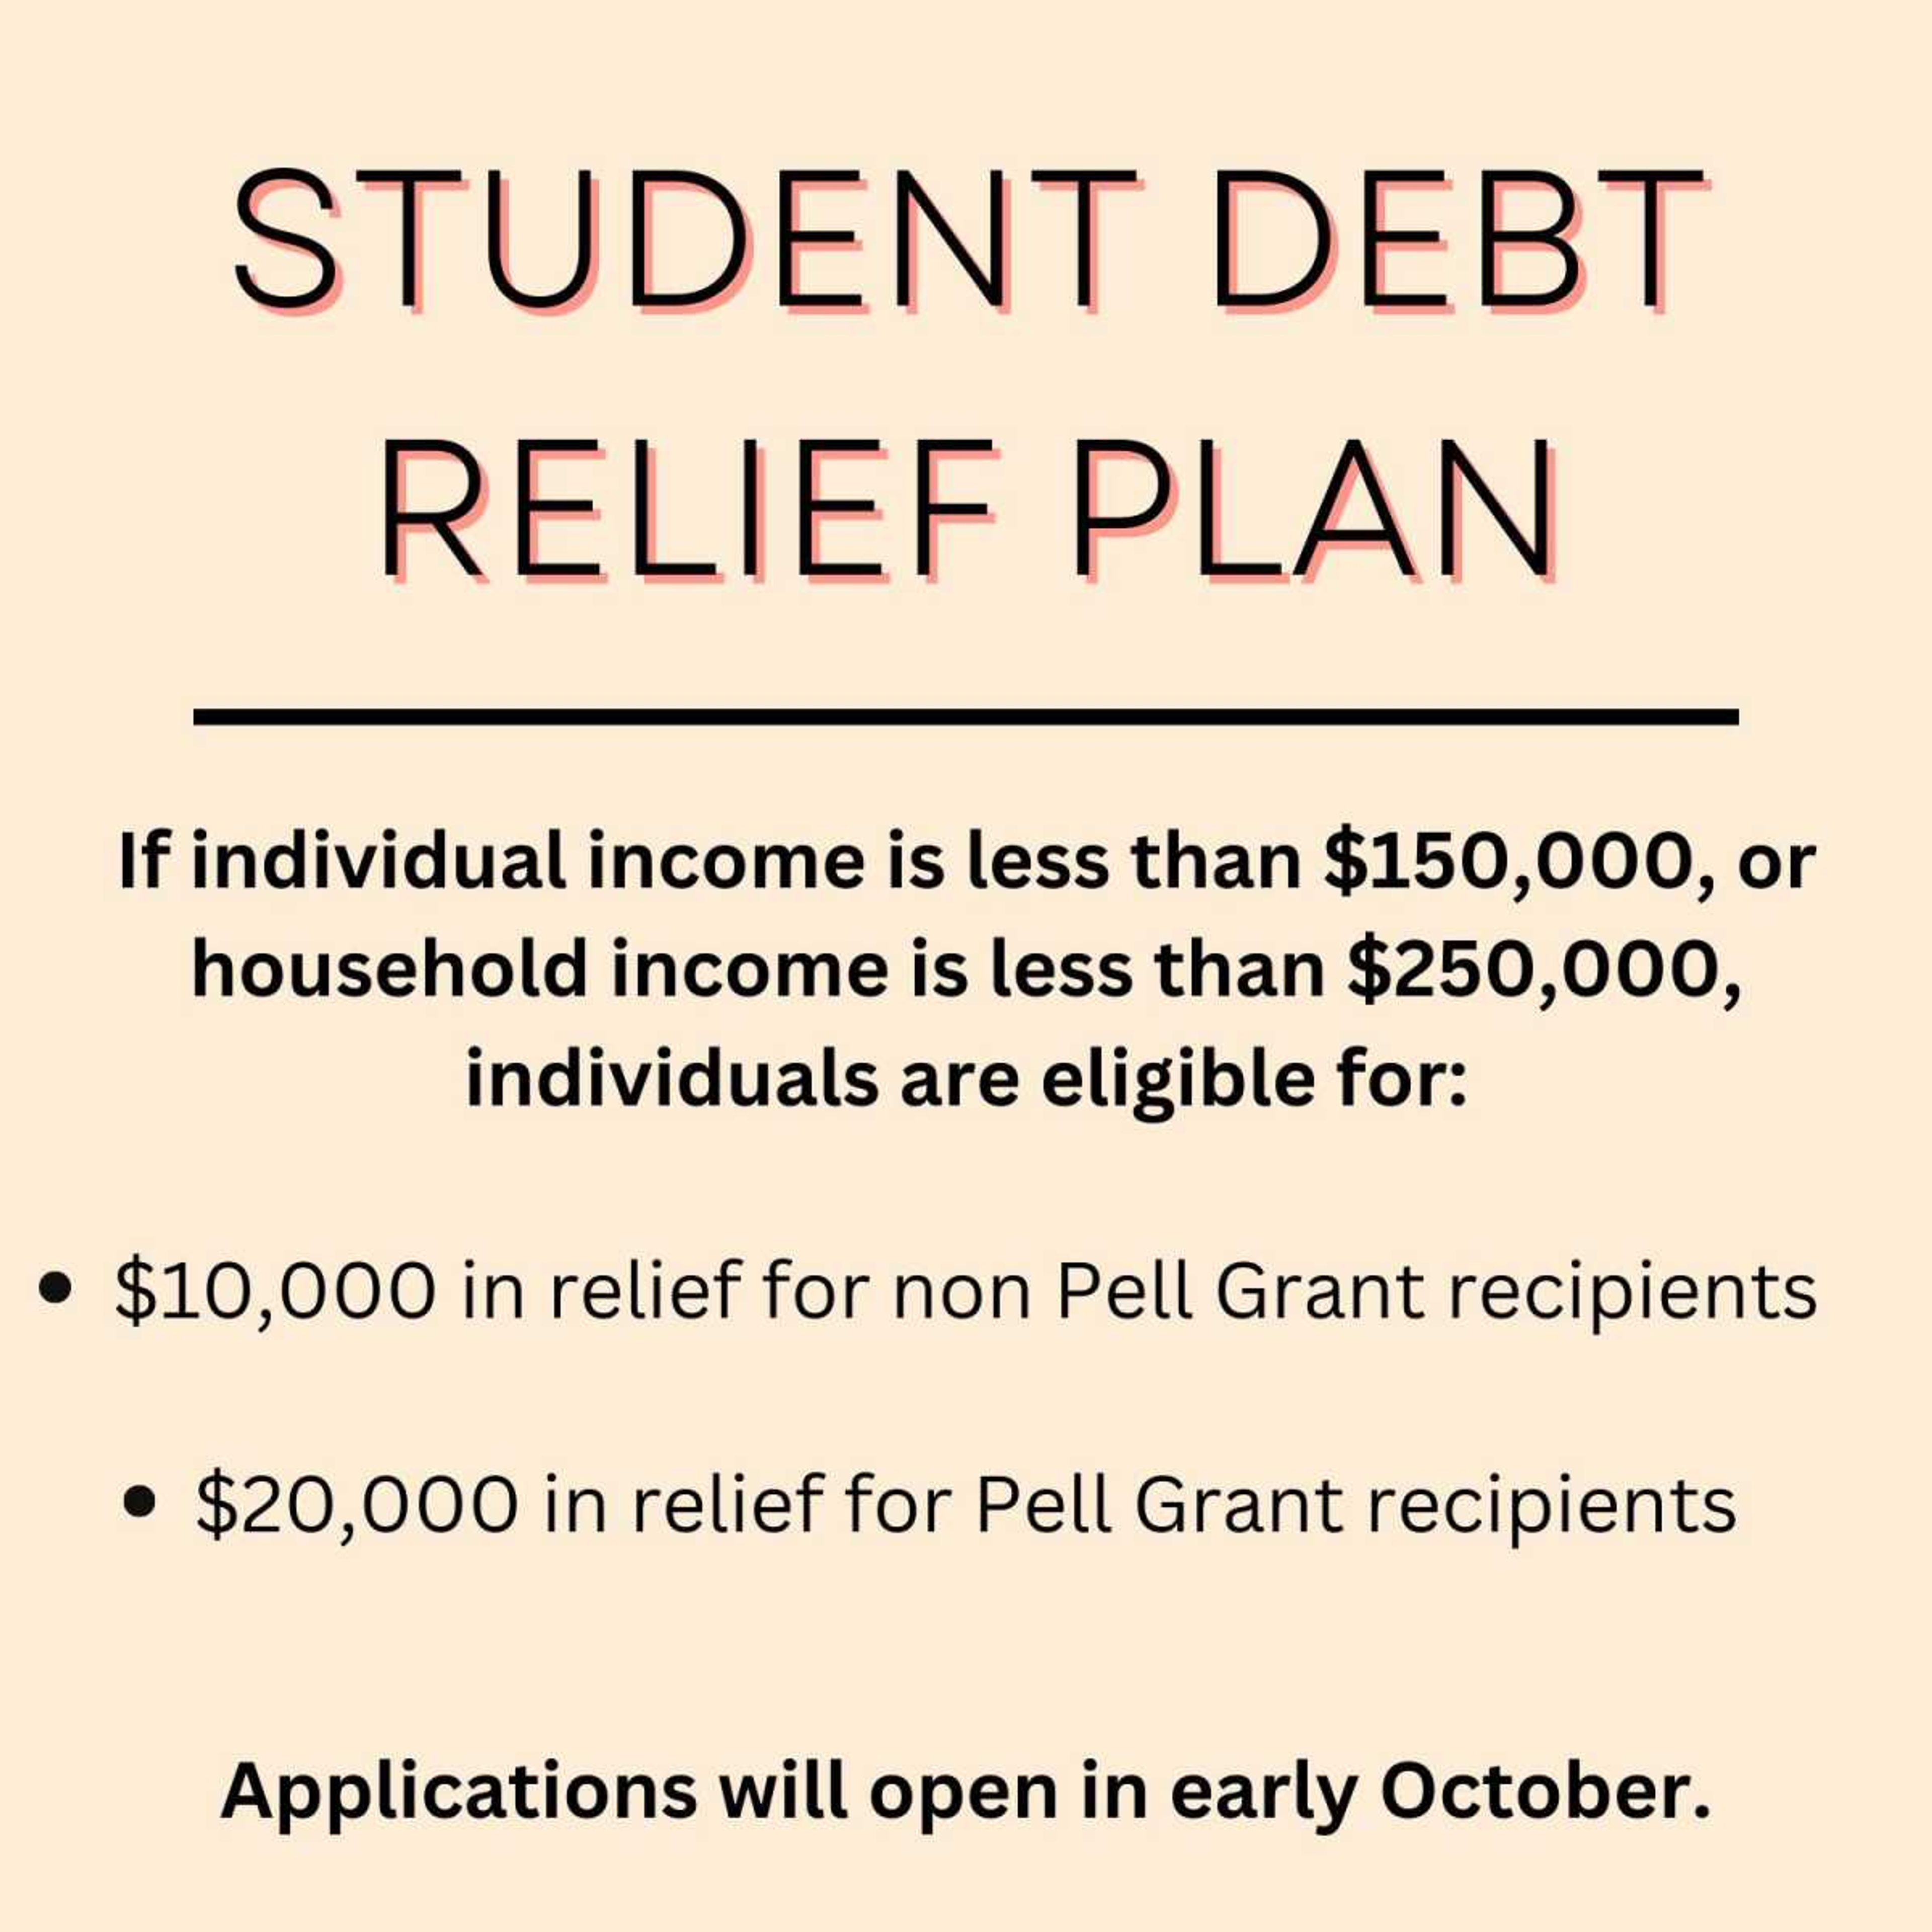 Students and faculty respond to debt relief plan